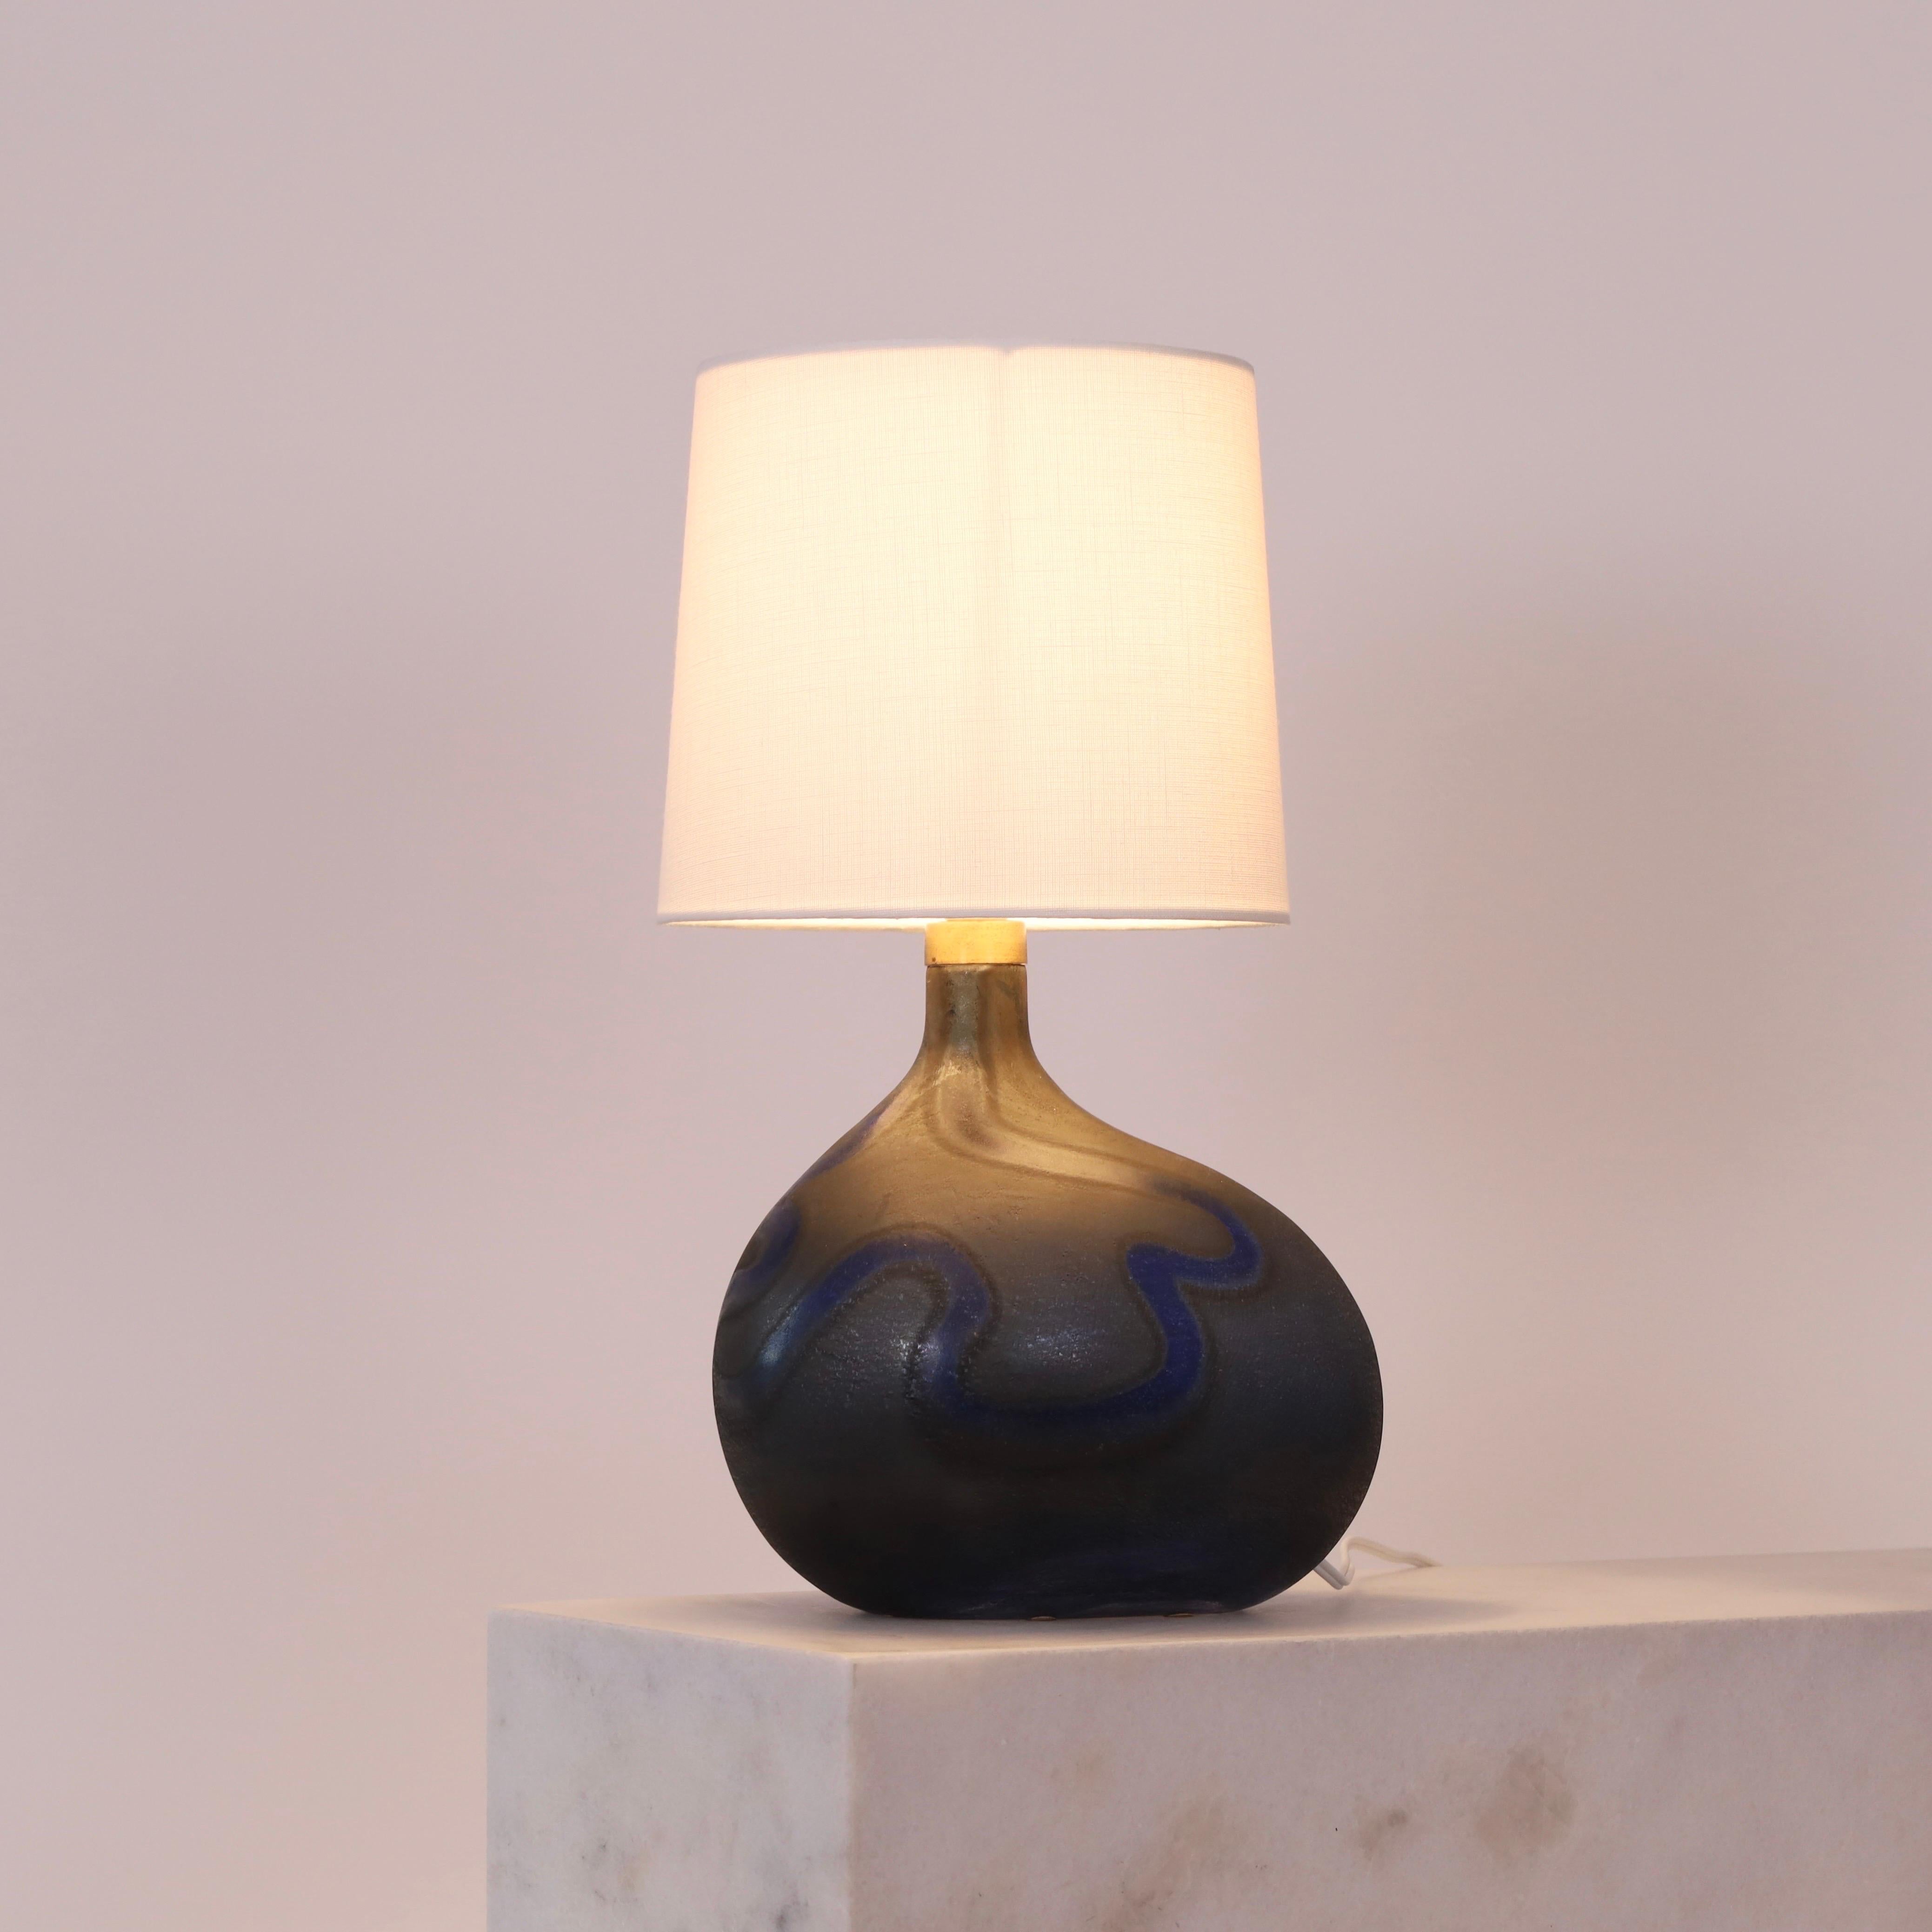 A Modern Lamp Art glass desk lamp in organic shaped designed by Michael Bang in 1972 for Holmegaard, Denmark. Irresistible to eye.

* A blue patterned organic glass table lamp with a white fabric shade.
* Designer: Michael Bang 
* Style: Lamp Art